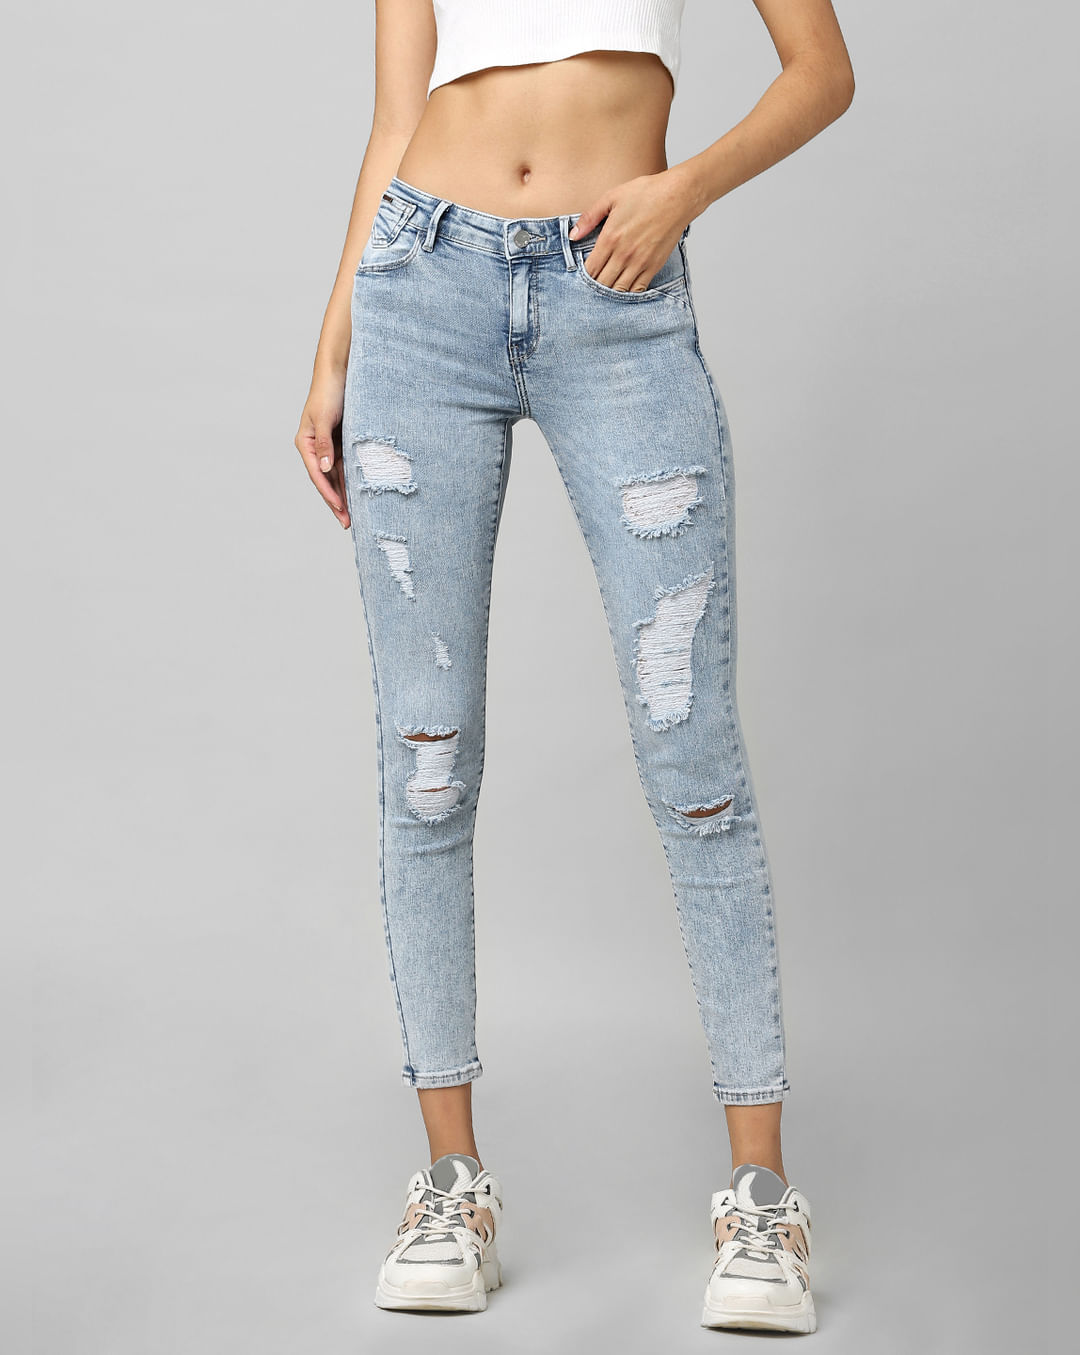 ripped jeans on women Cheap Sell - OFF 68%